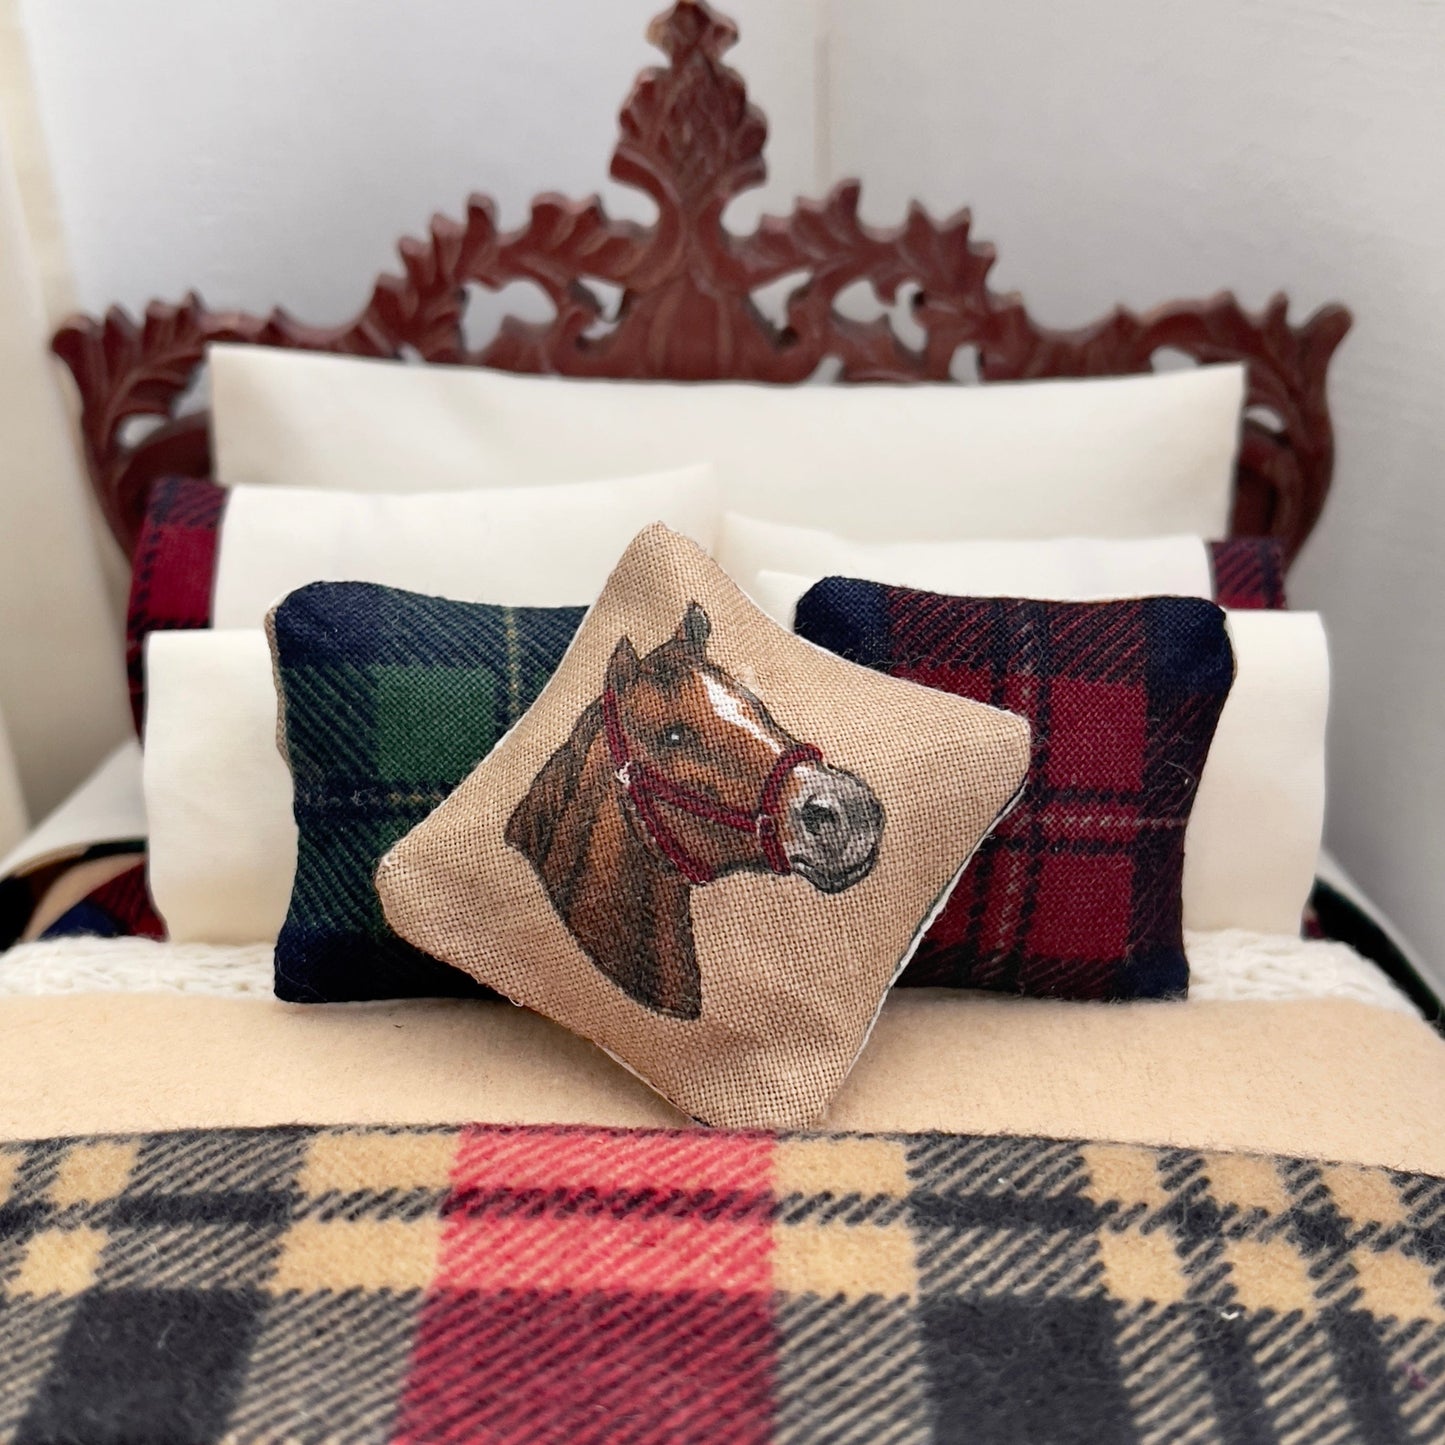 Chantallena Country Manor Country Weekend |  Creamy Tan Cotton Bedding Set with Horse Motif Pillow | Gentle Canter